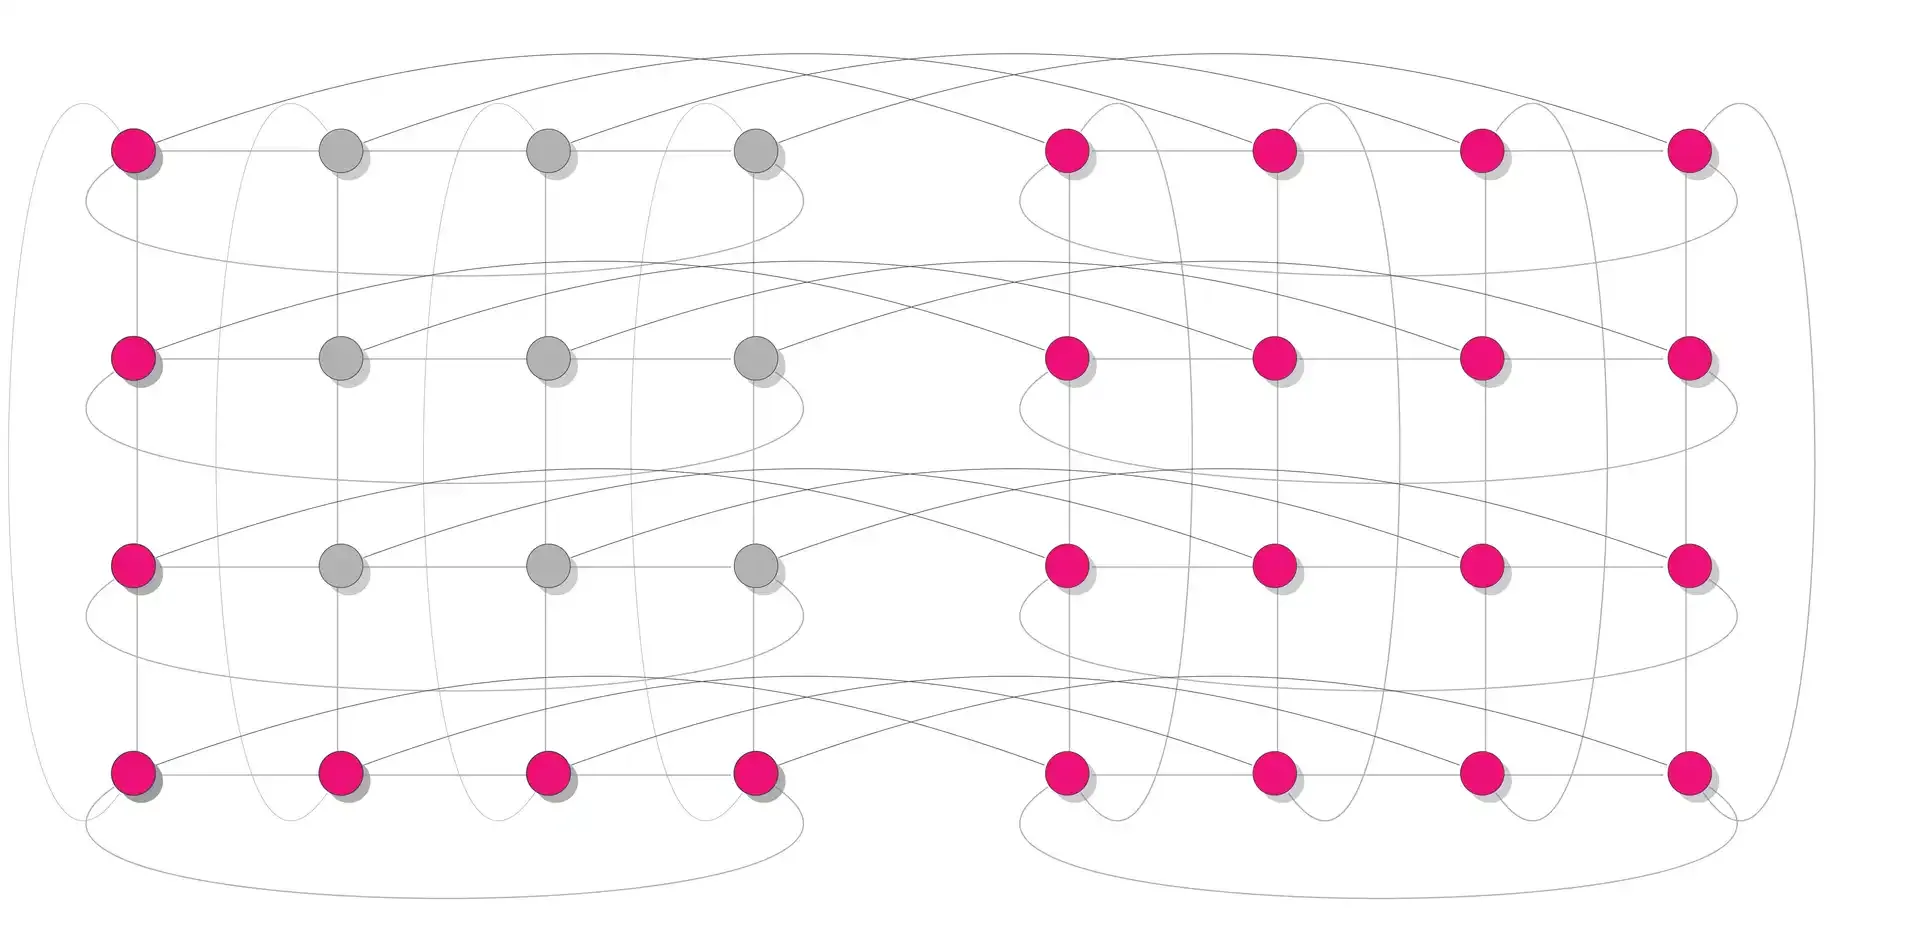 Researchers investigated a "regular graph state"—pictured here as particles and the connections between them—and found that too many connections made the state useless for quantum computing. (Credit: Dominik Hangleiter/JQI)